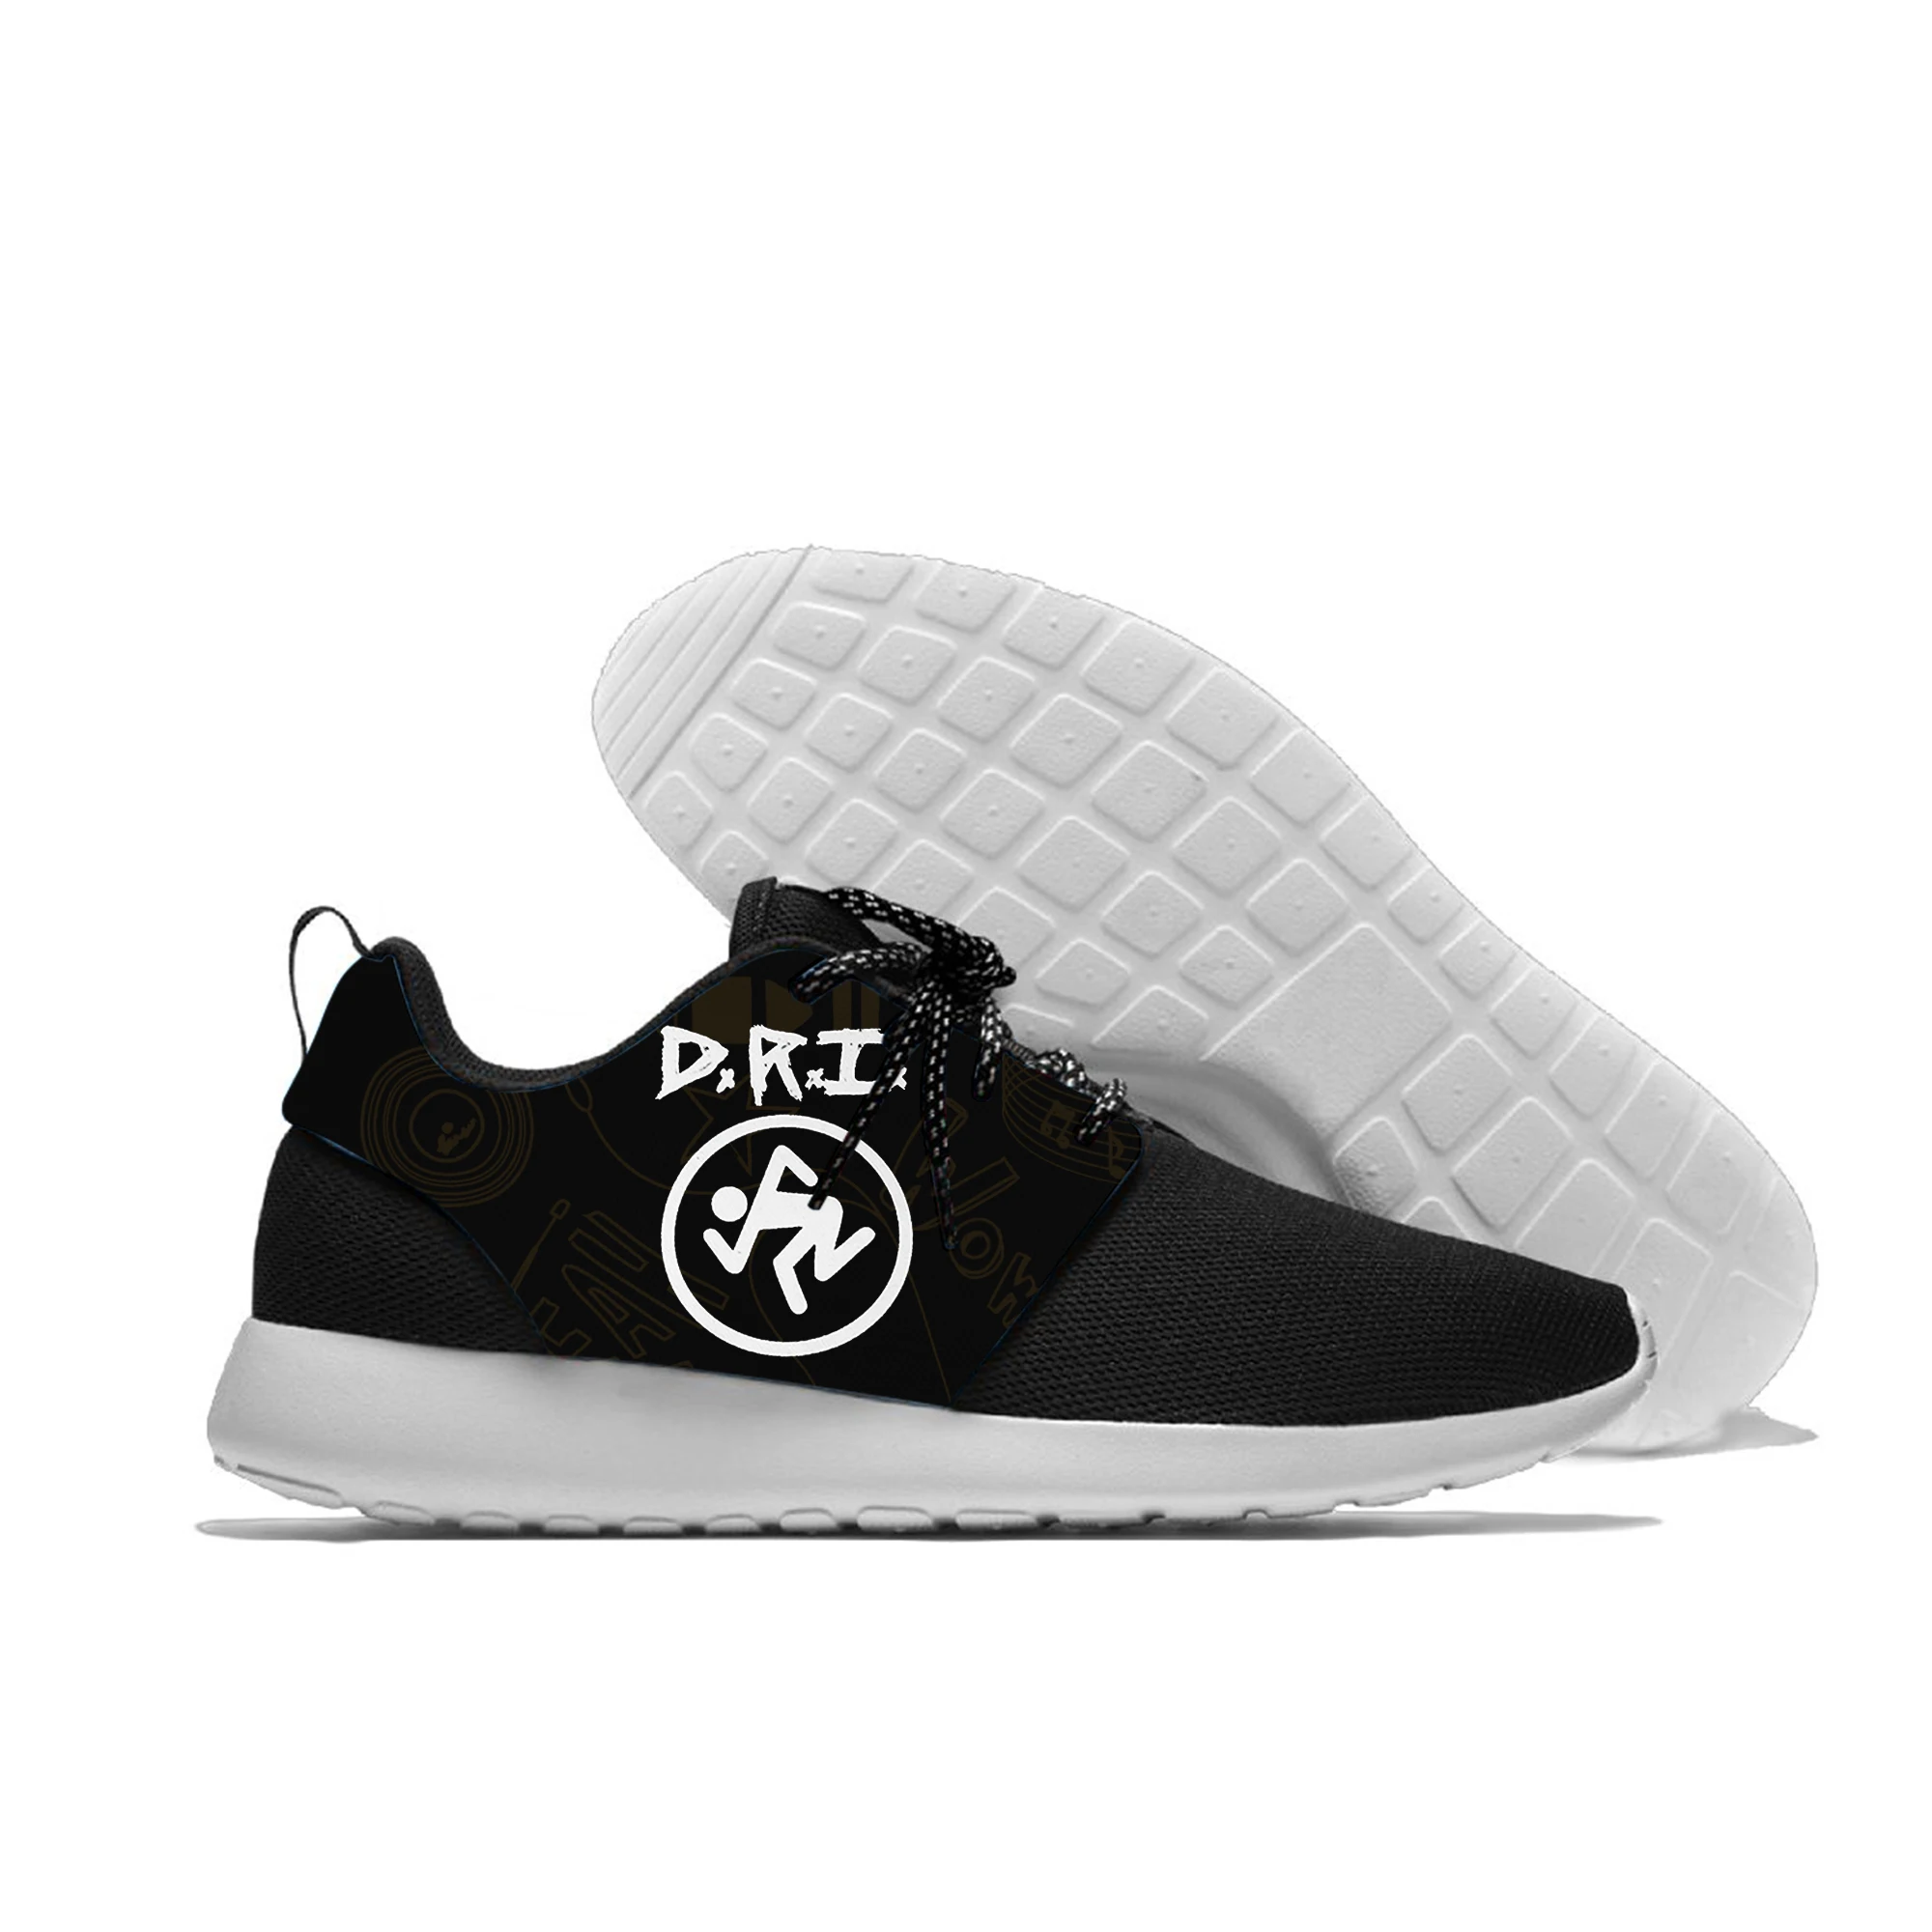 

Running Shoes Men Print The Metal Band D.R.I Images Custom Shoes Men Casual Sneakers Women Zapatos Casuales De Los Hombres